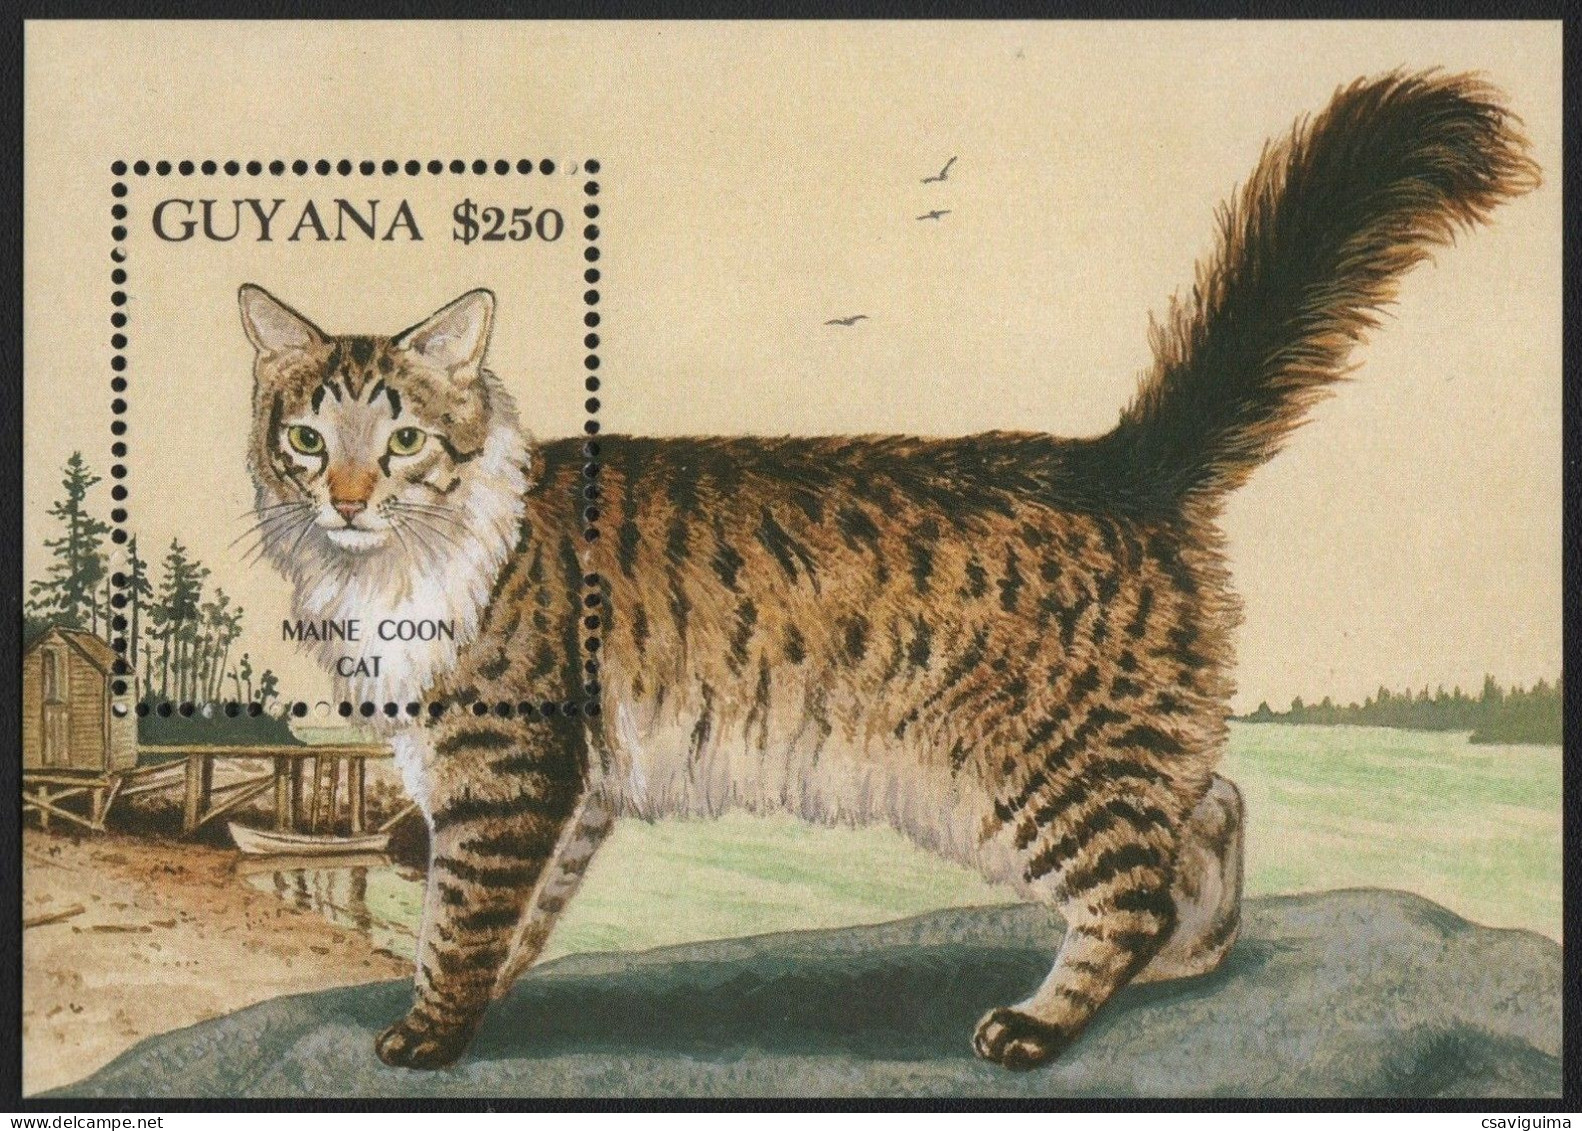 Guyana - 1992 - Cats: Maine Coon - Yv Bf 107 - Gatos Domésticos